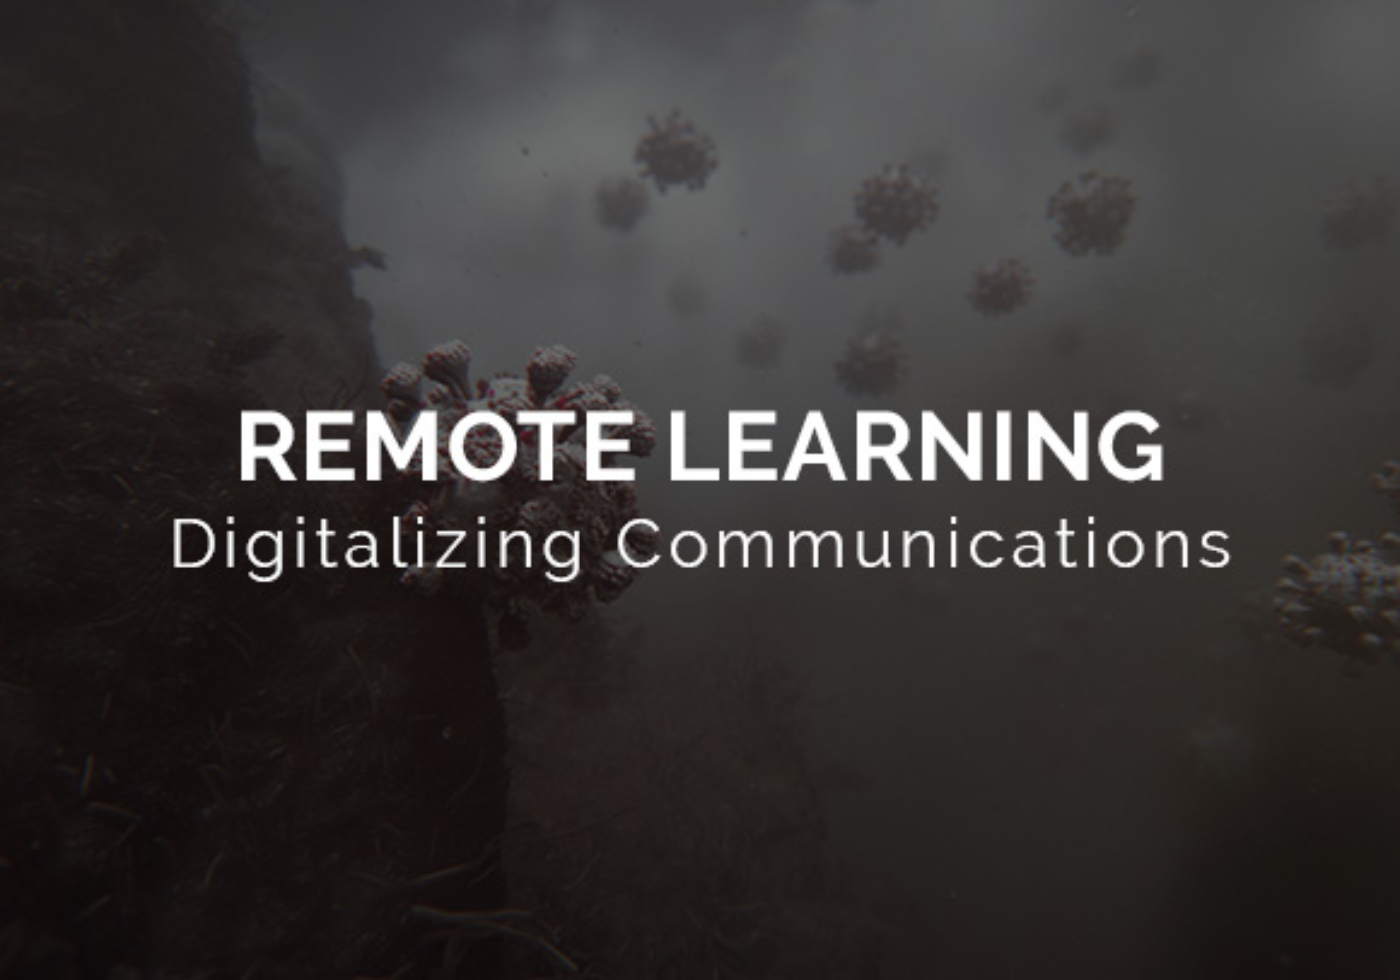 2020 A Year for Remote Learning Logo